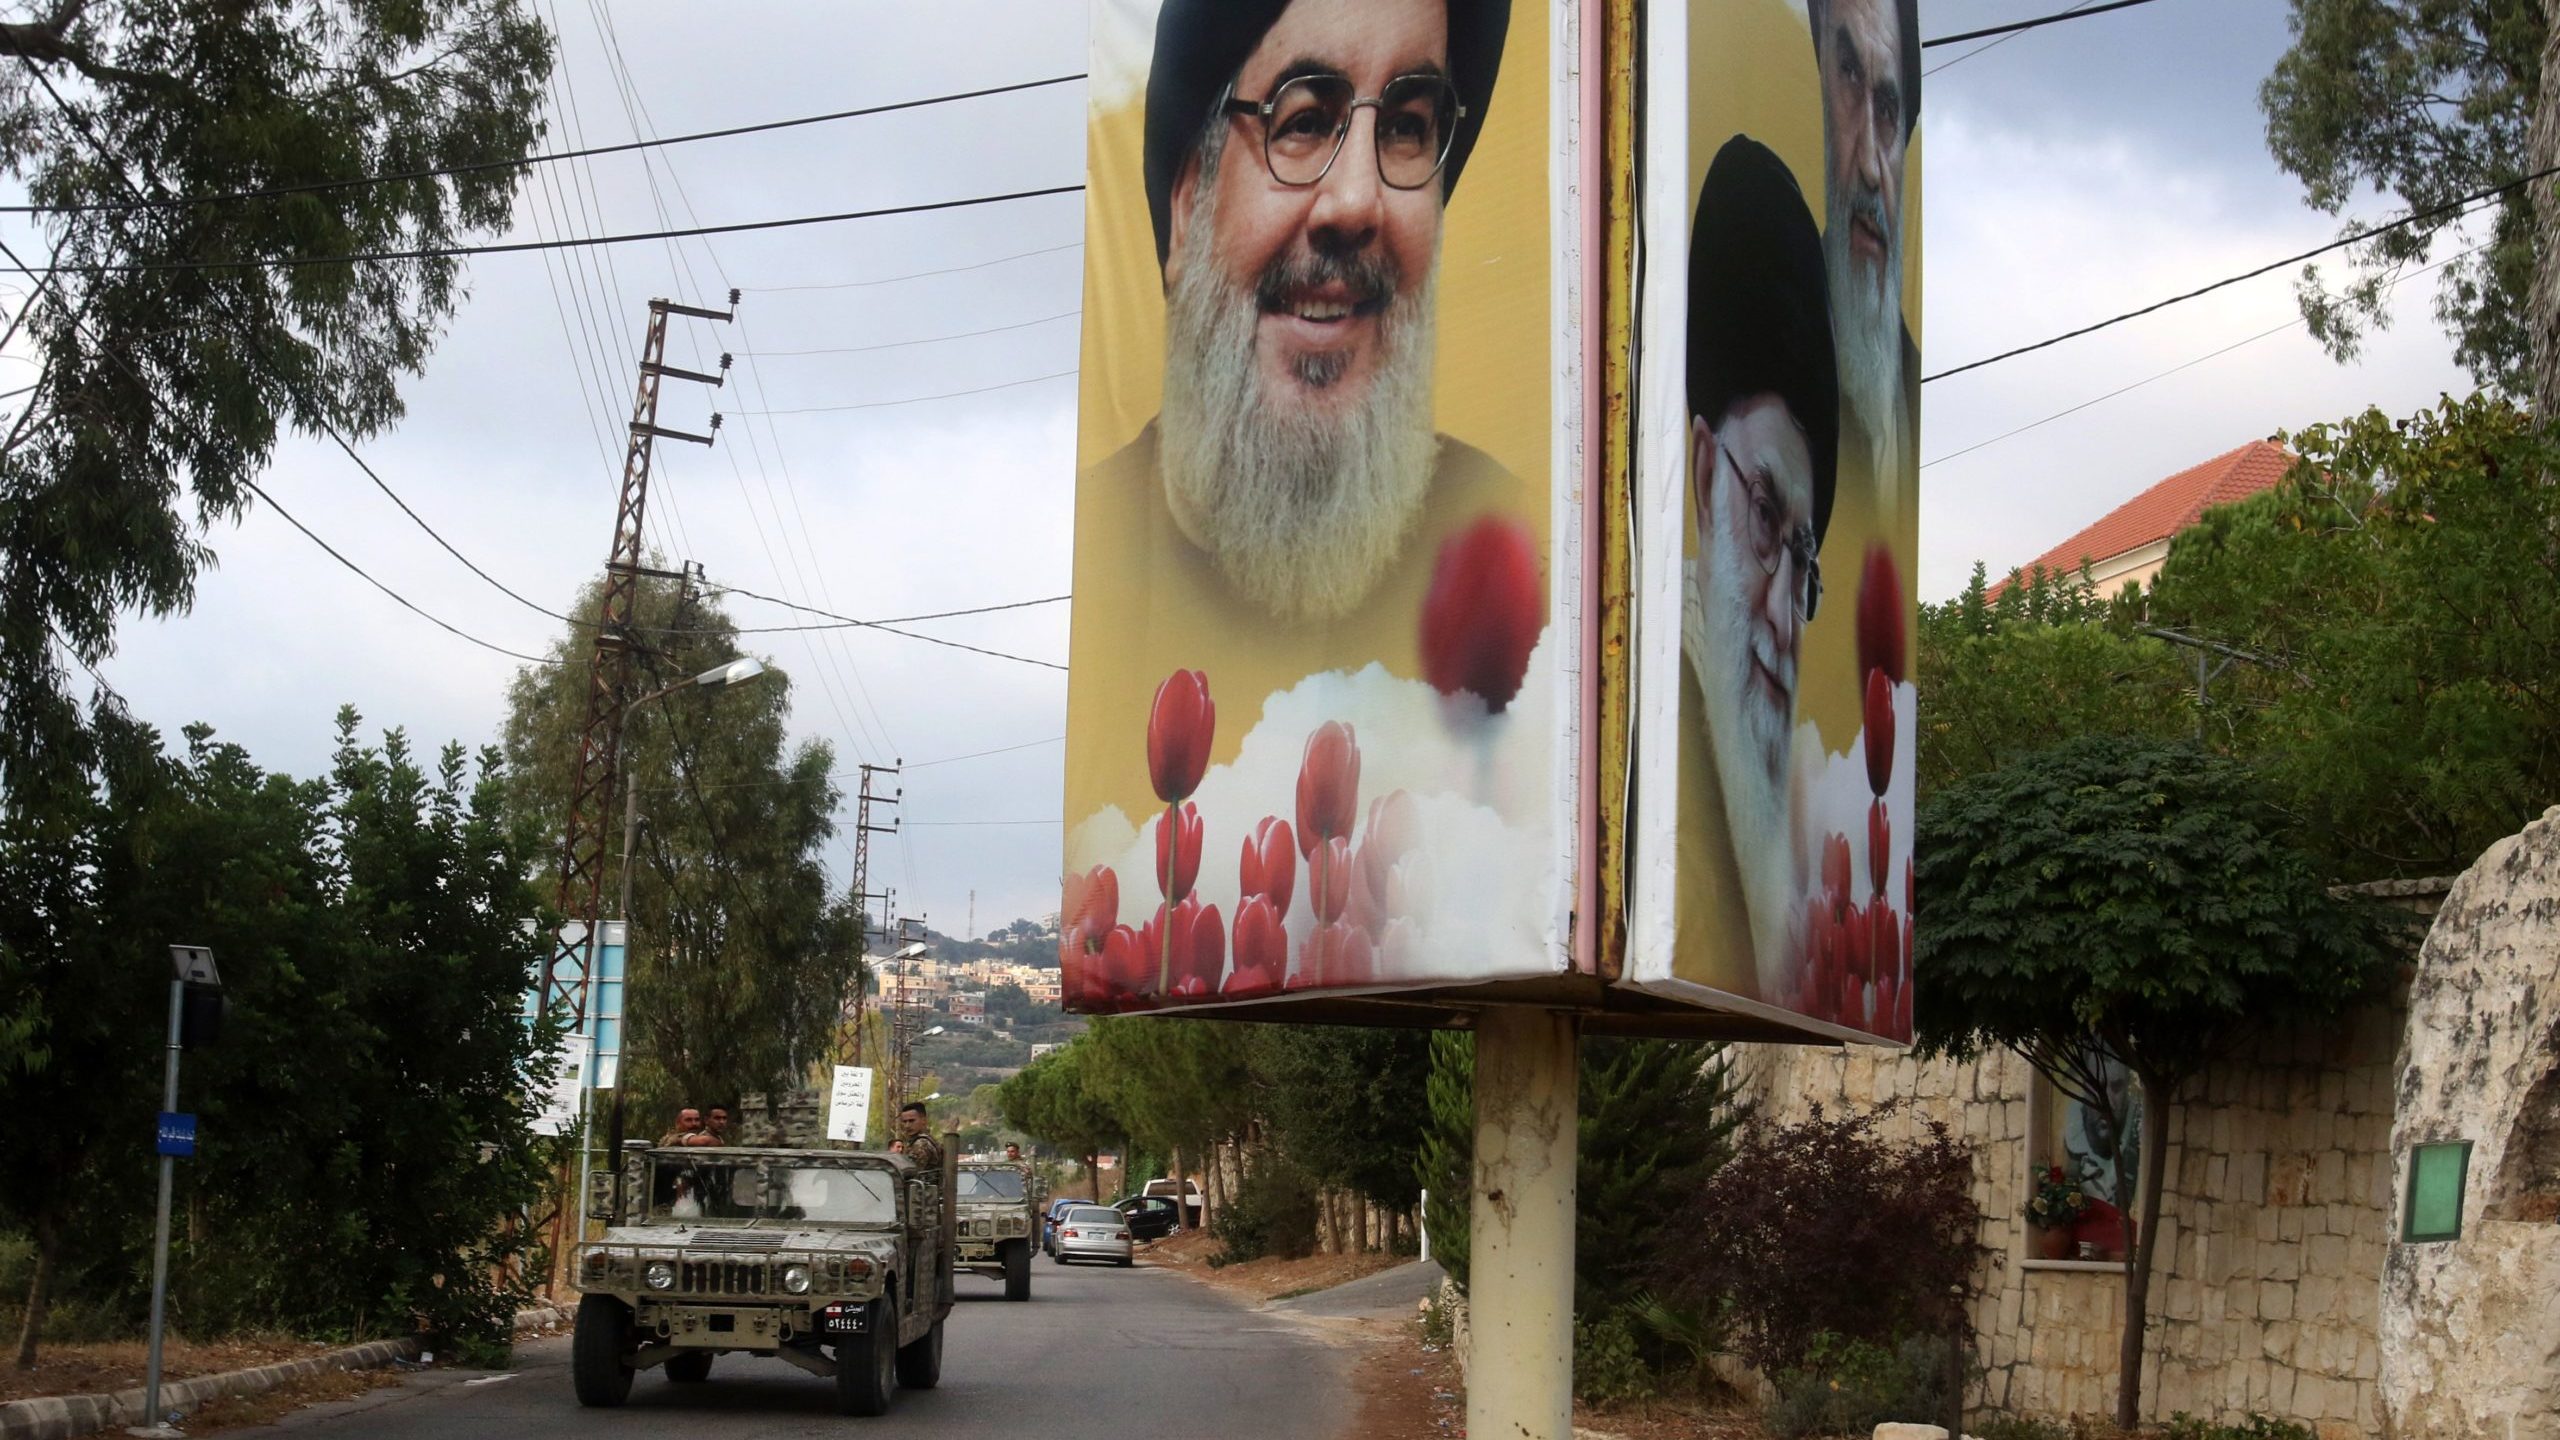 Nasrallah Threatens, But Hands Are Tied, Analysts Say